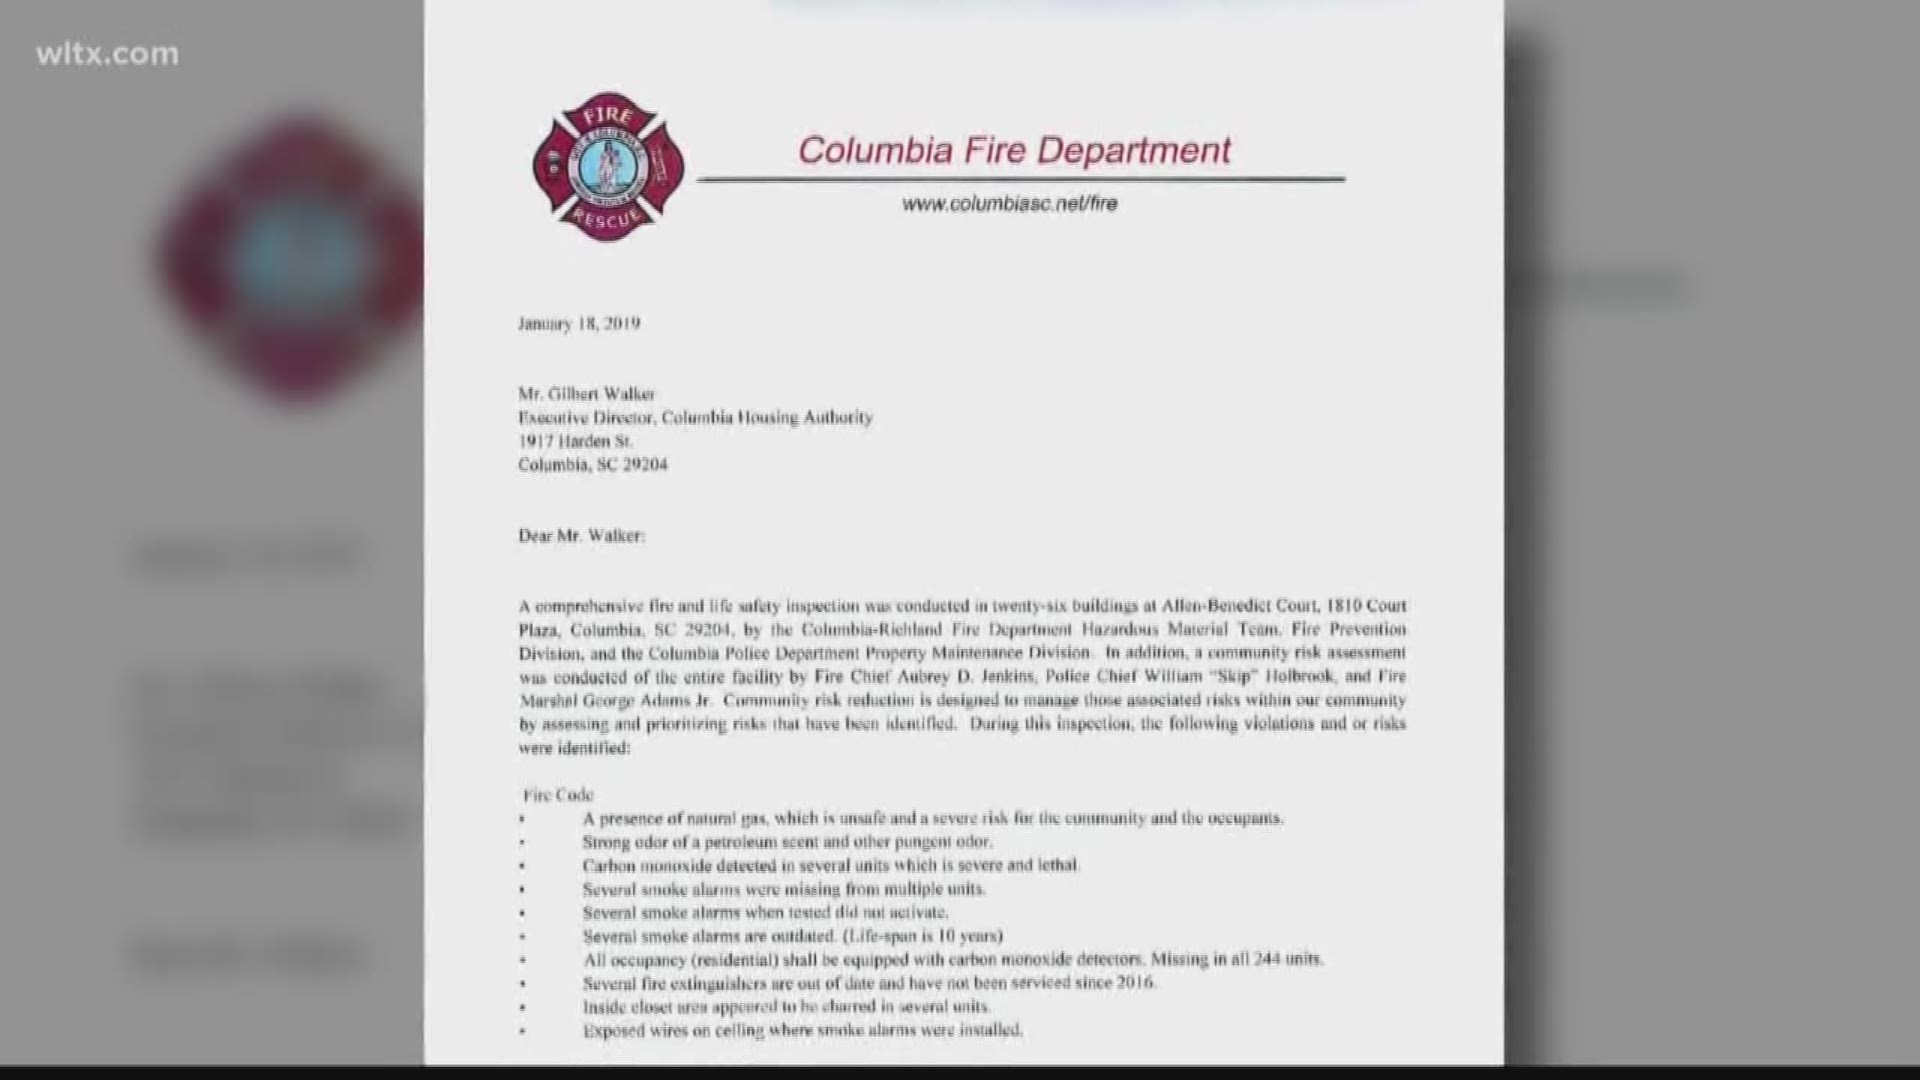 A letter from the Columbia Fire Department to the Columbia Housing Authority details nearly two dozen violations